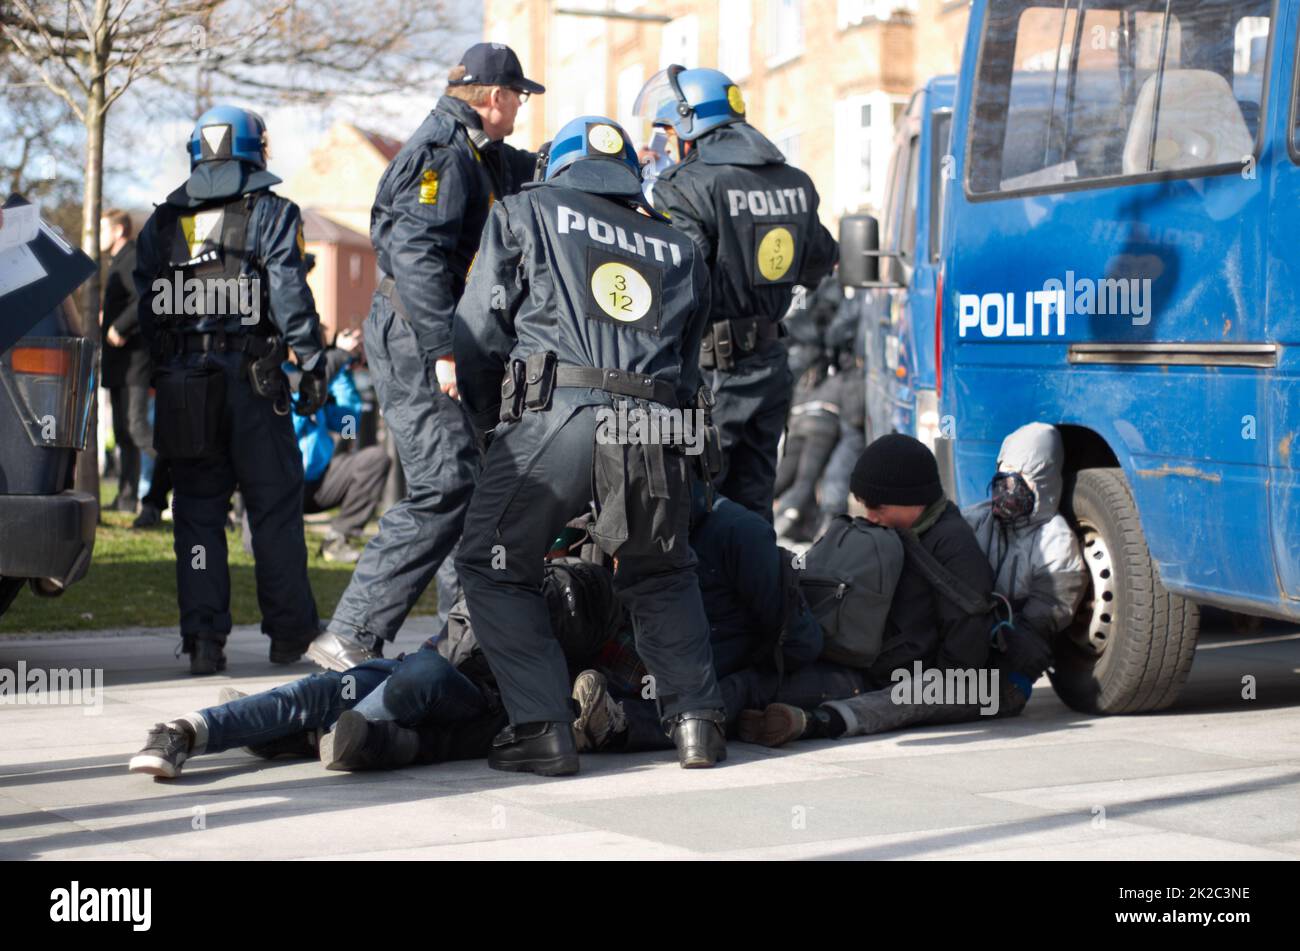 Enforcing the law. Policement arresting a suspect. Stock Photo